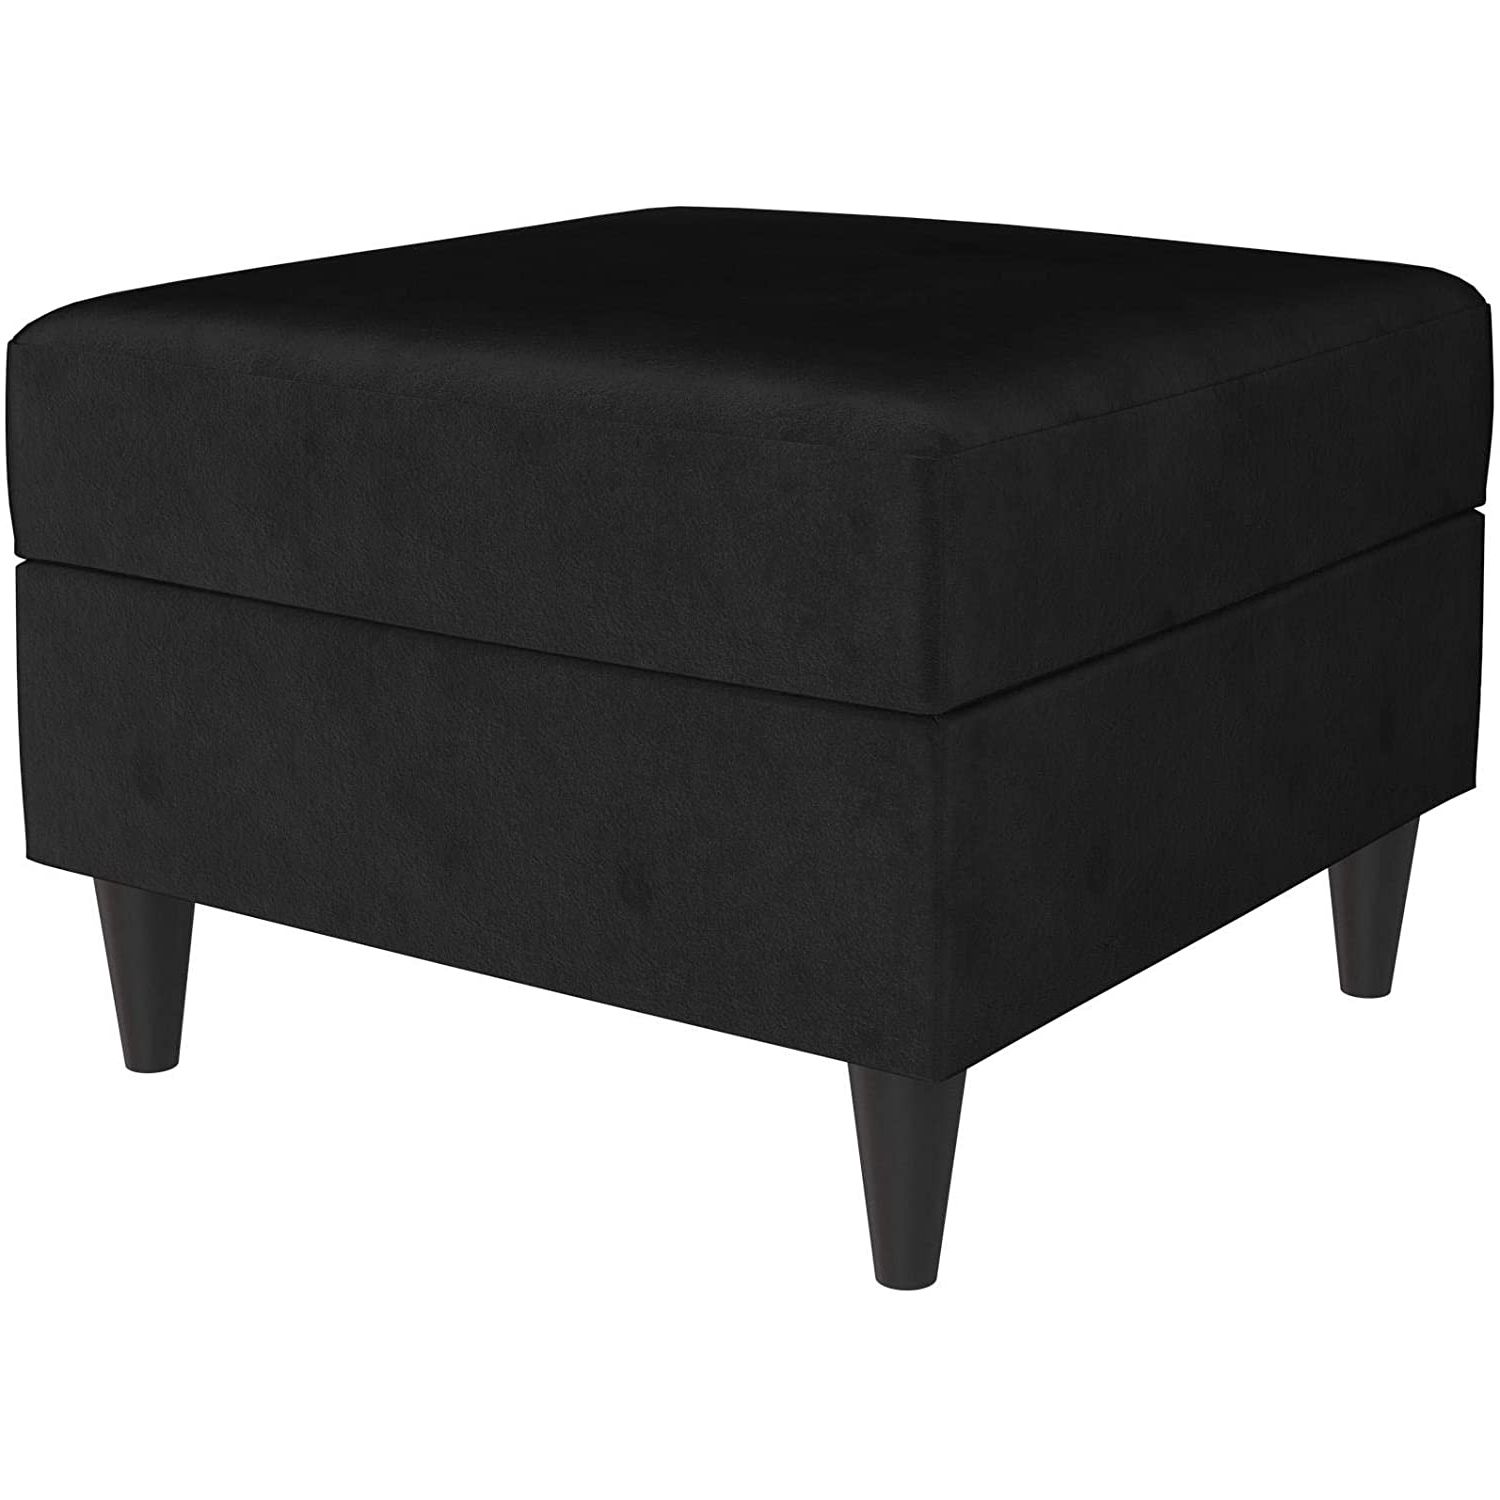 Black And Ivory Solid Cube Pouf Ottomans For Fashionable Amazon: Contemporary Cooper Small Square Ottoman With Storage (View 5 of 10)